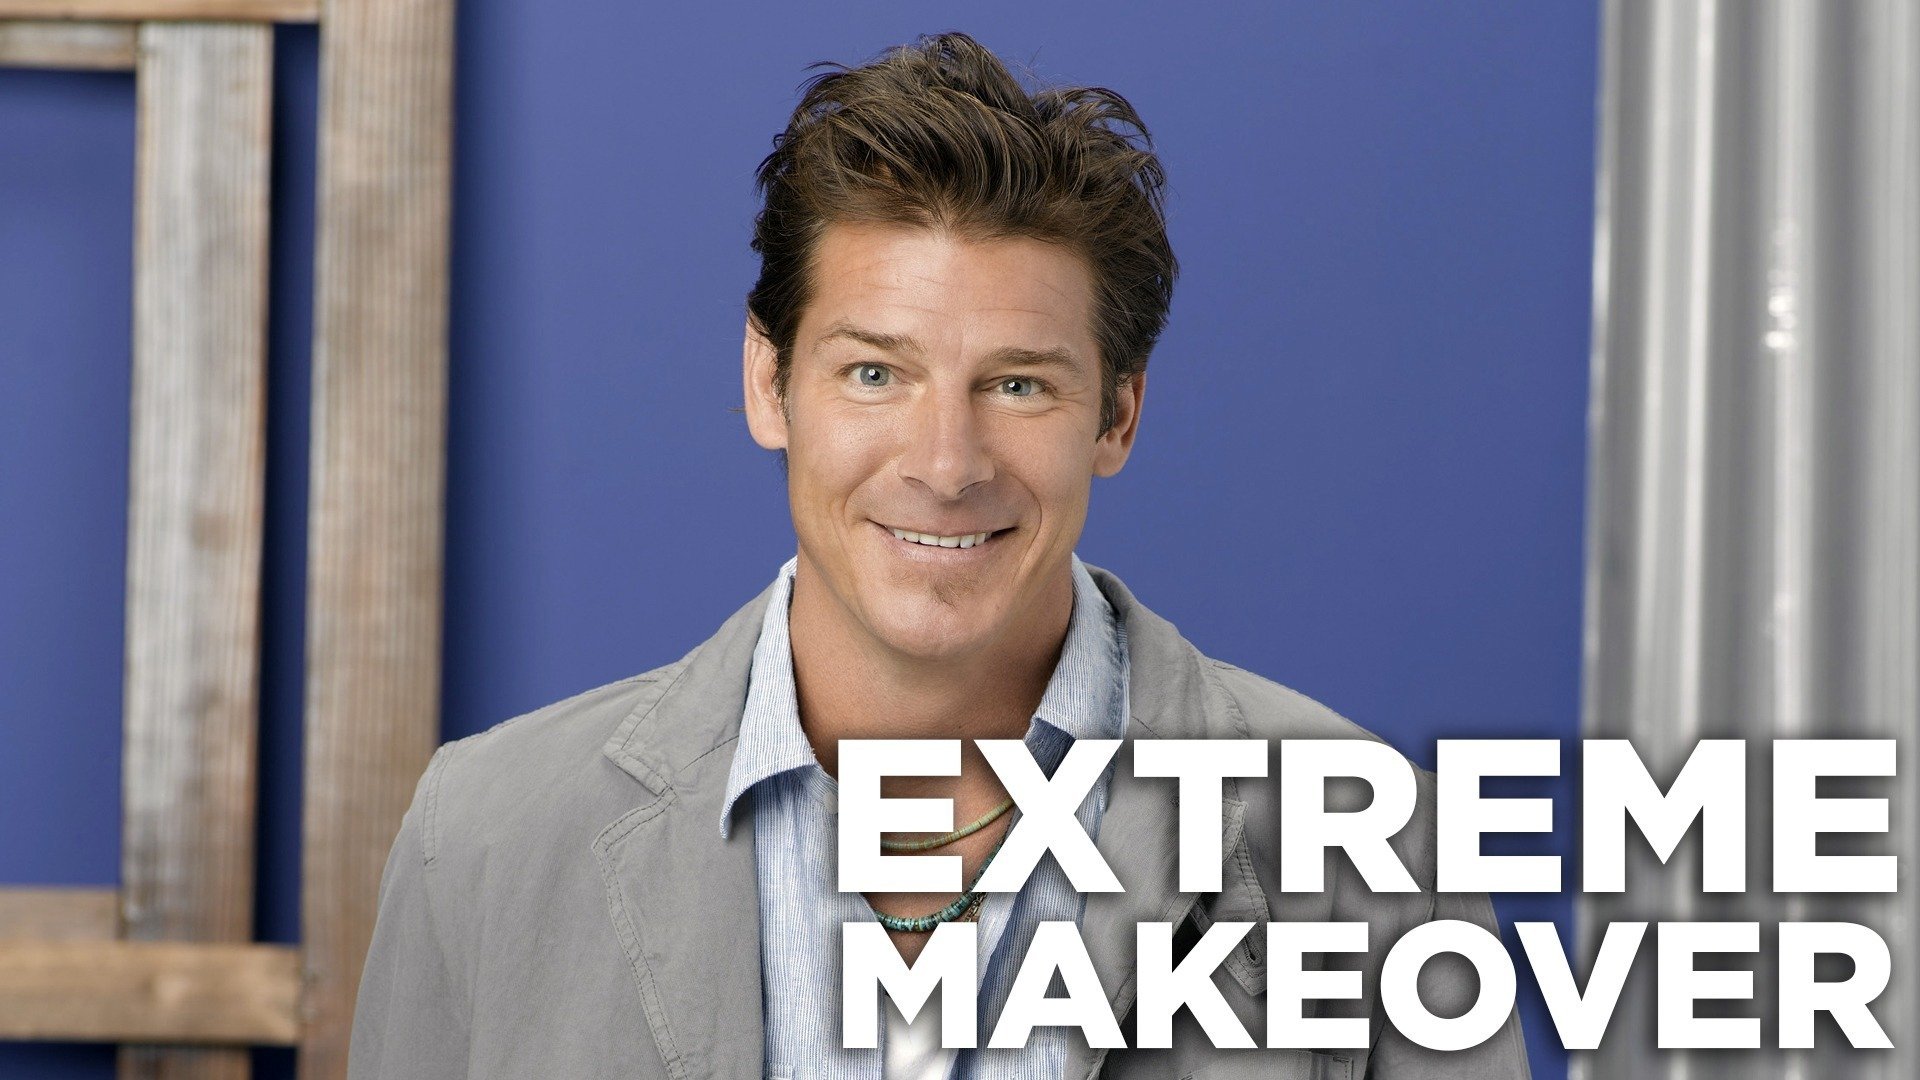 watch extreme makeover home edition season 4 episode 2